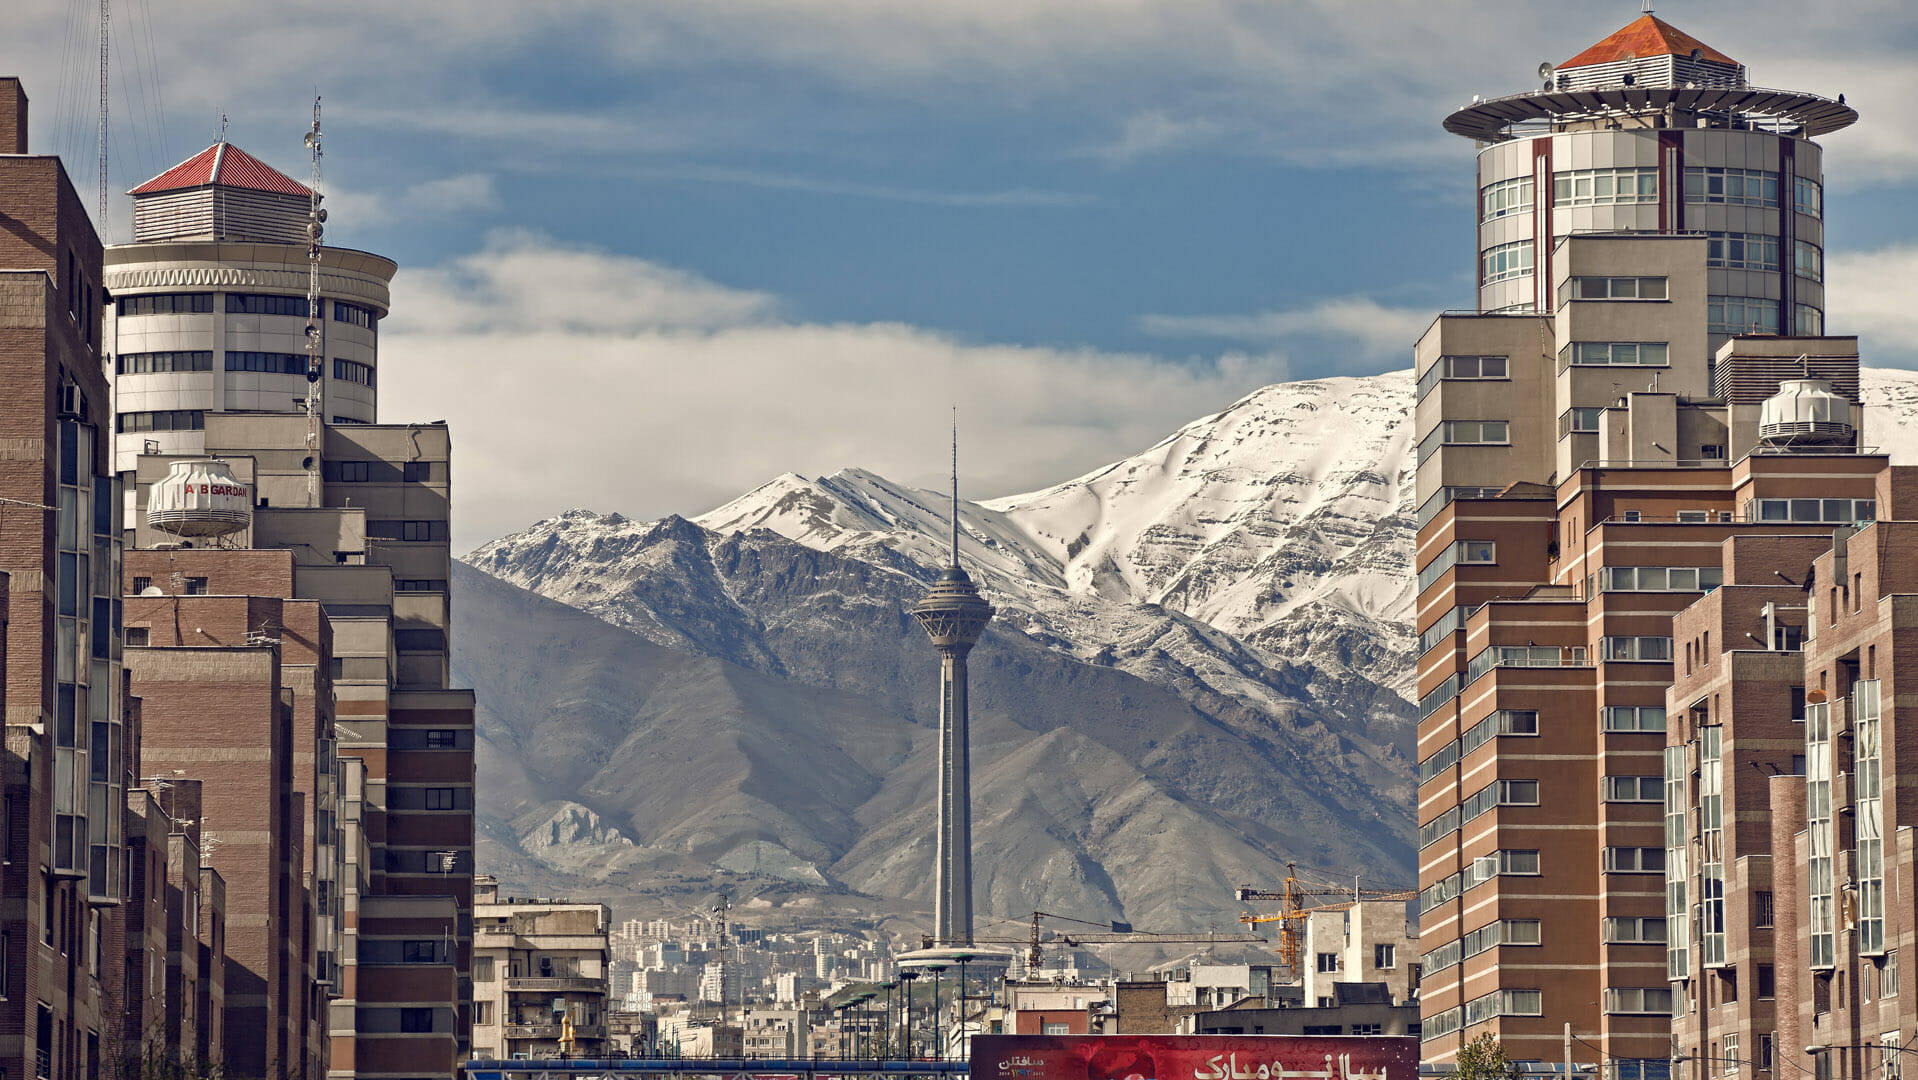 Caption: The Majestic Milad Tower Against The Skyline Of Tehran, Iran